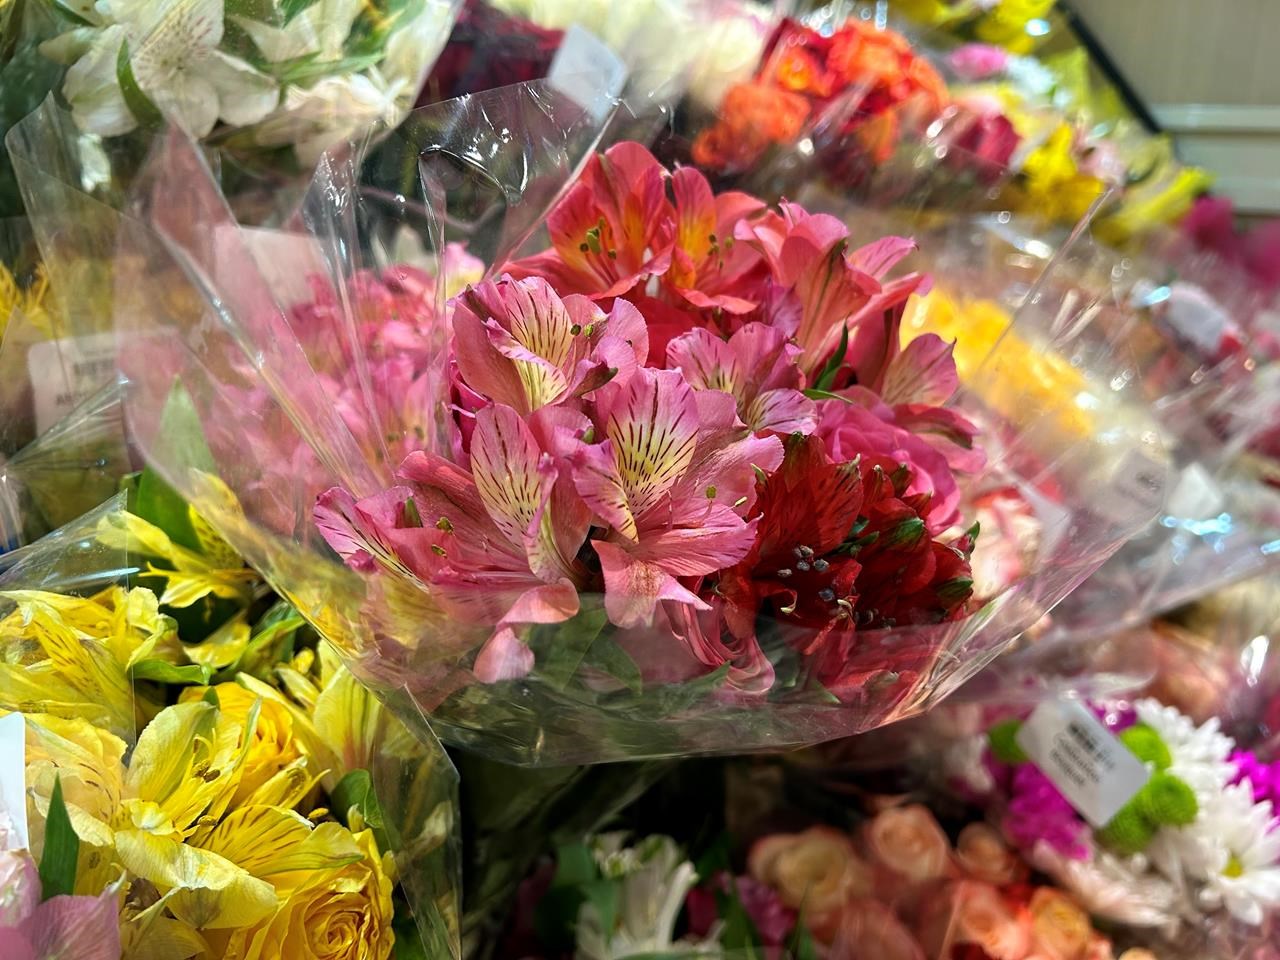 There may be no fresh flowers to buy for Valentine's Day along